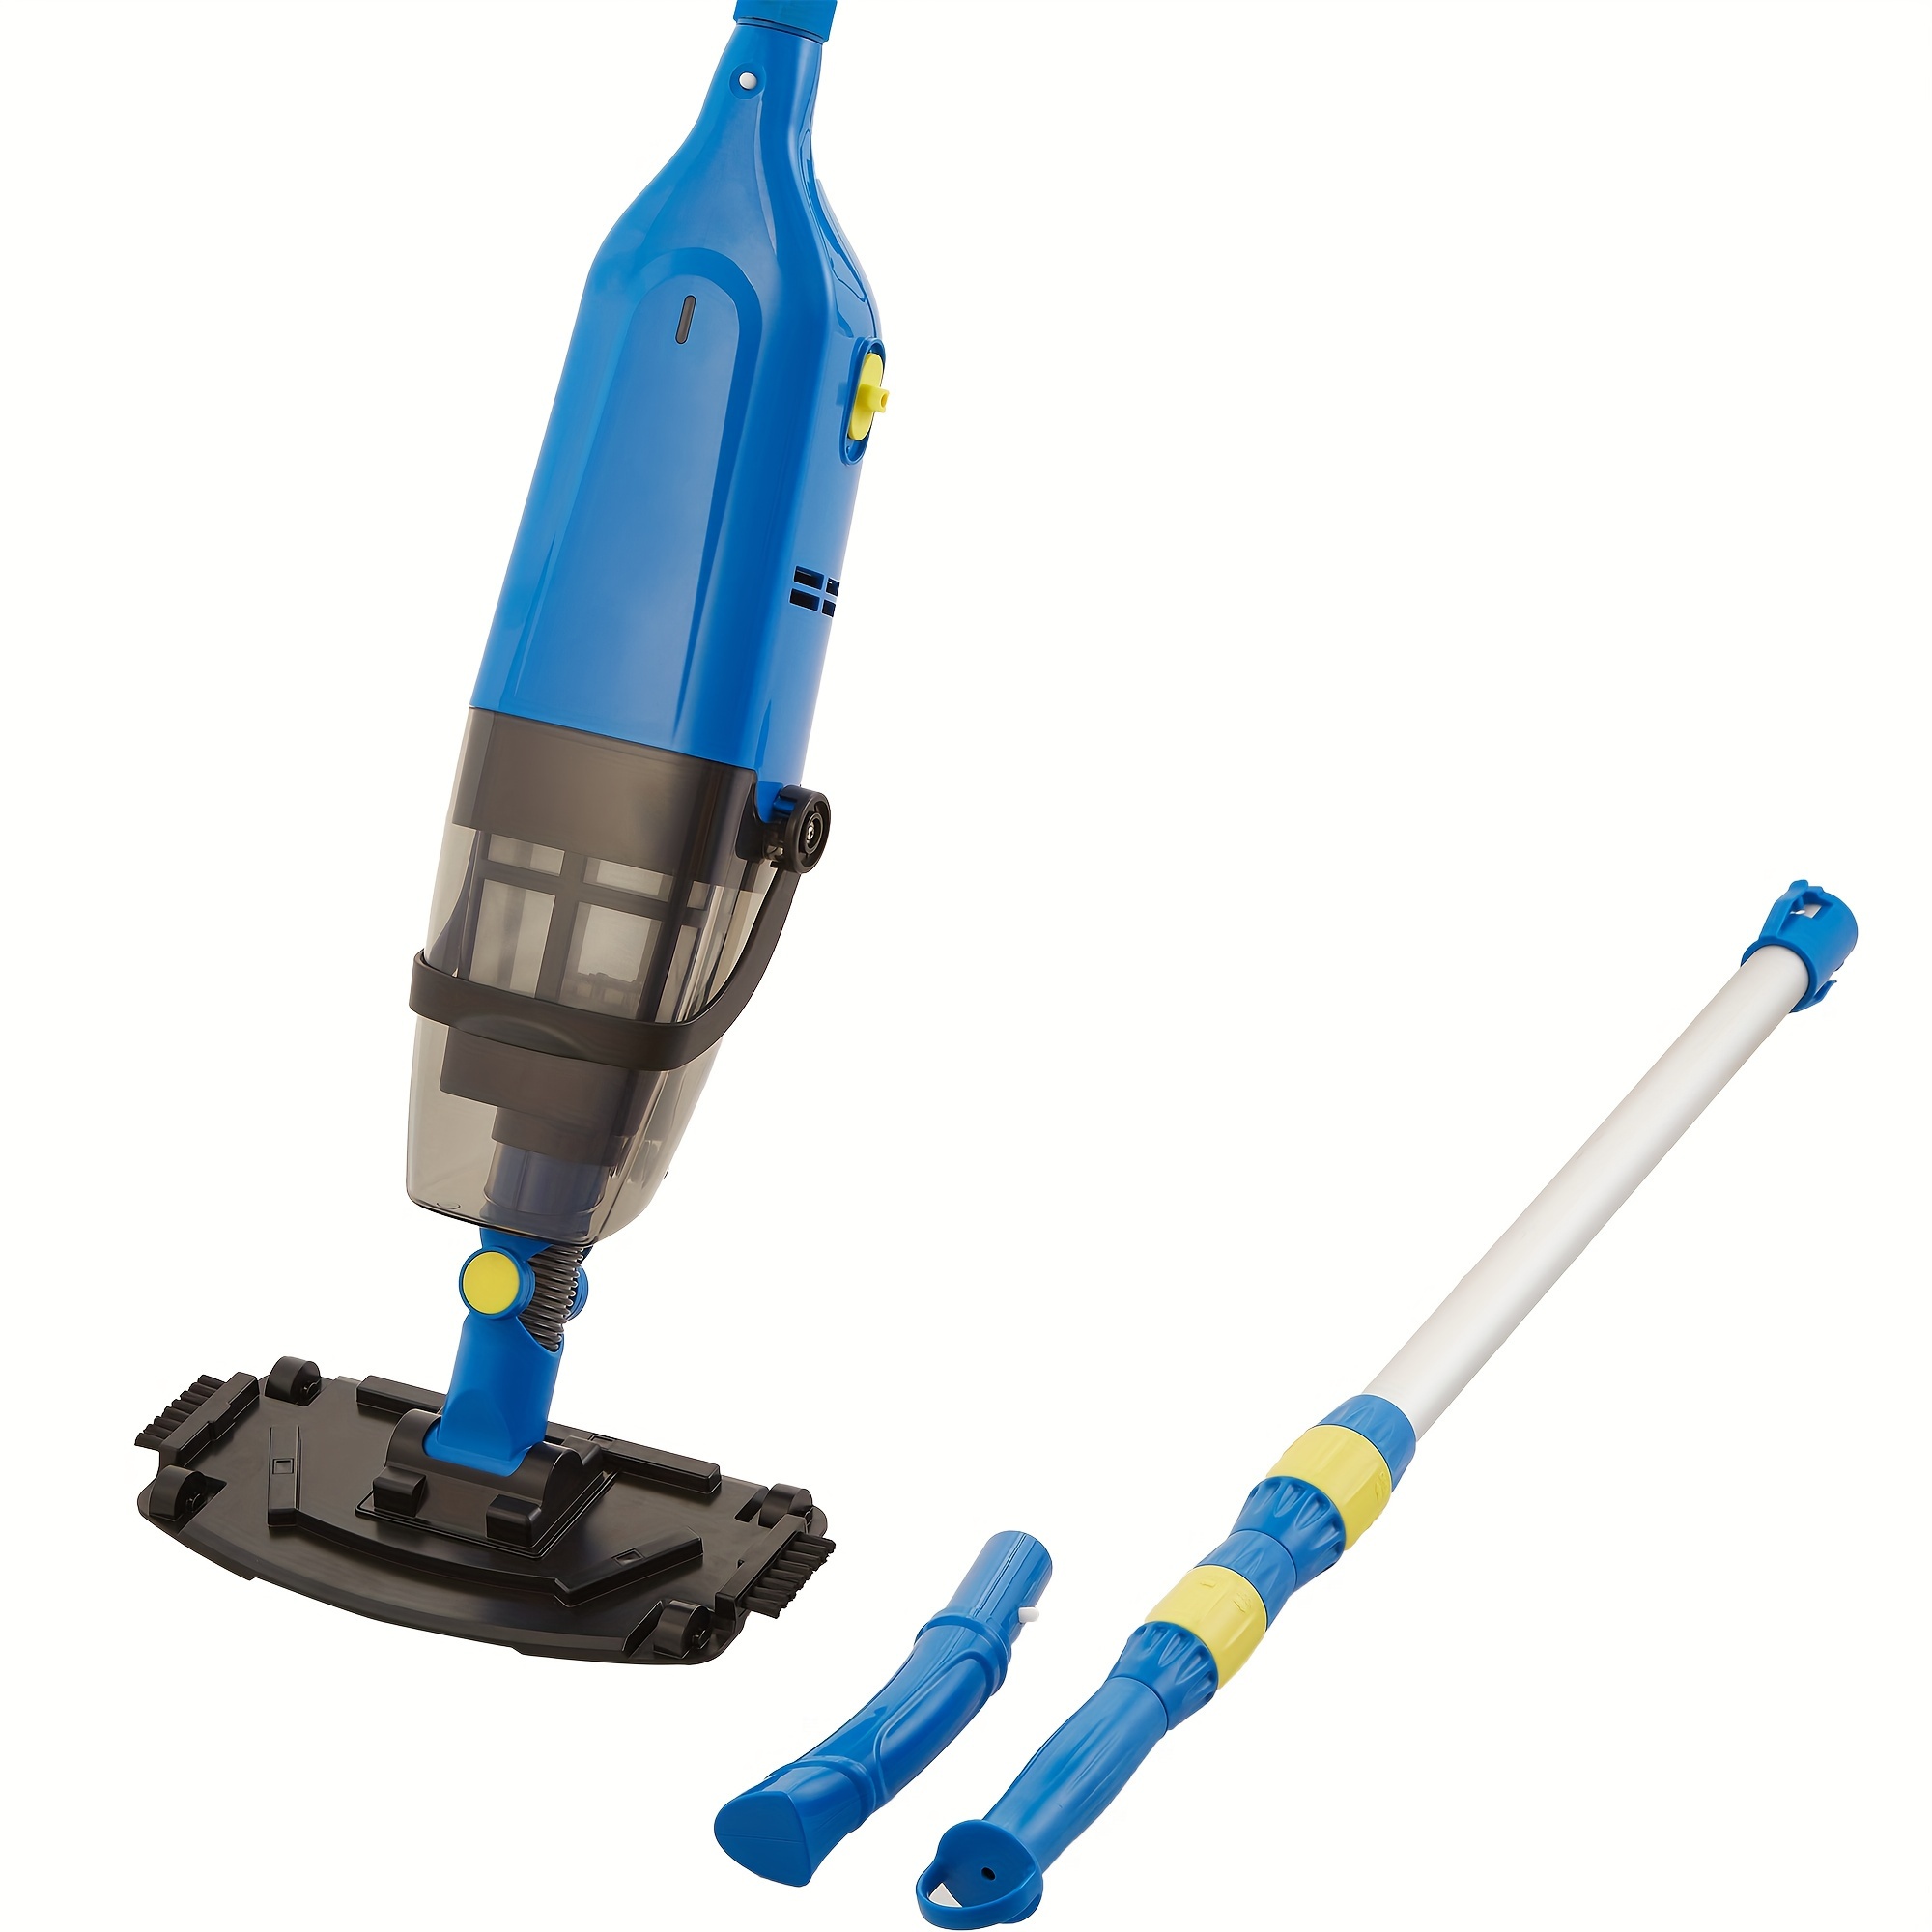 

Pool Vacuum For Above Ground Pools, Handheld Pool Cleaner With Running Time Up To 60 Minutes Ideal For Spas And Hot Tub